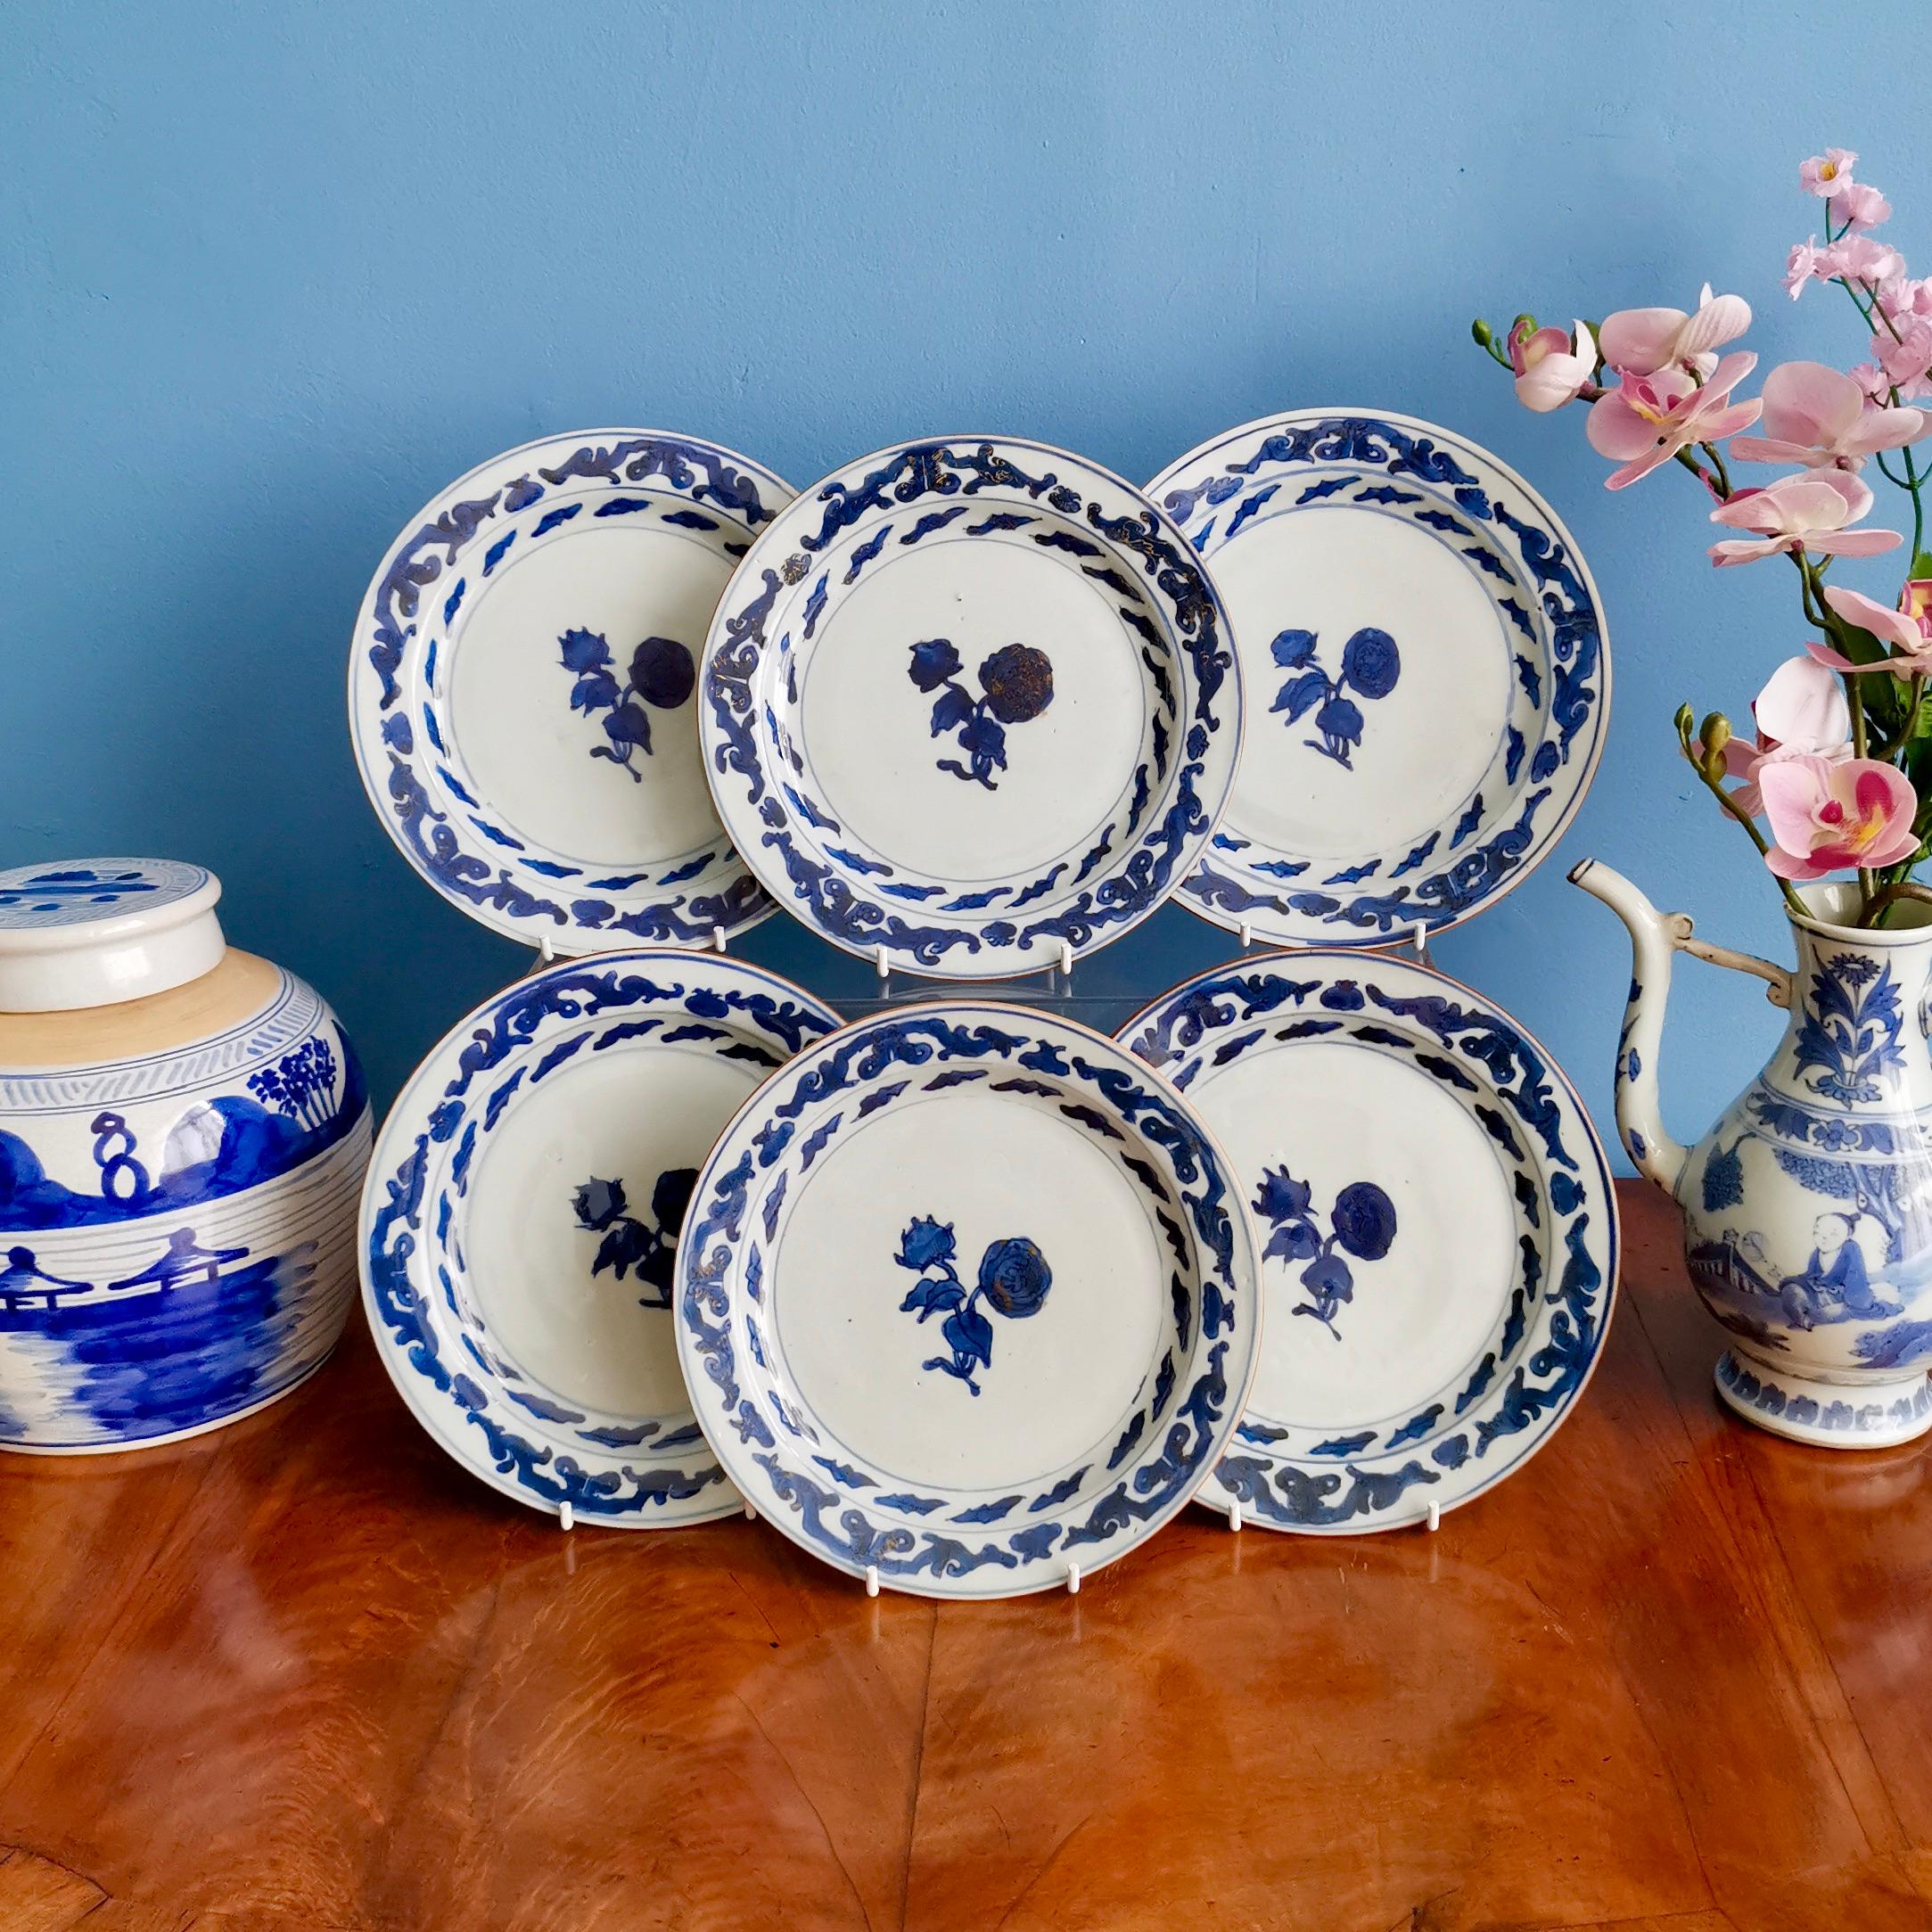 This is a beautiful set of six small plates made in China for export to the West in the late Qianlong era, circa 1780. These plates were made for export to the West, to be precise to the Netherlands, which was a major importer of blue and white